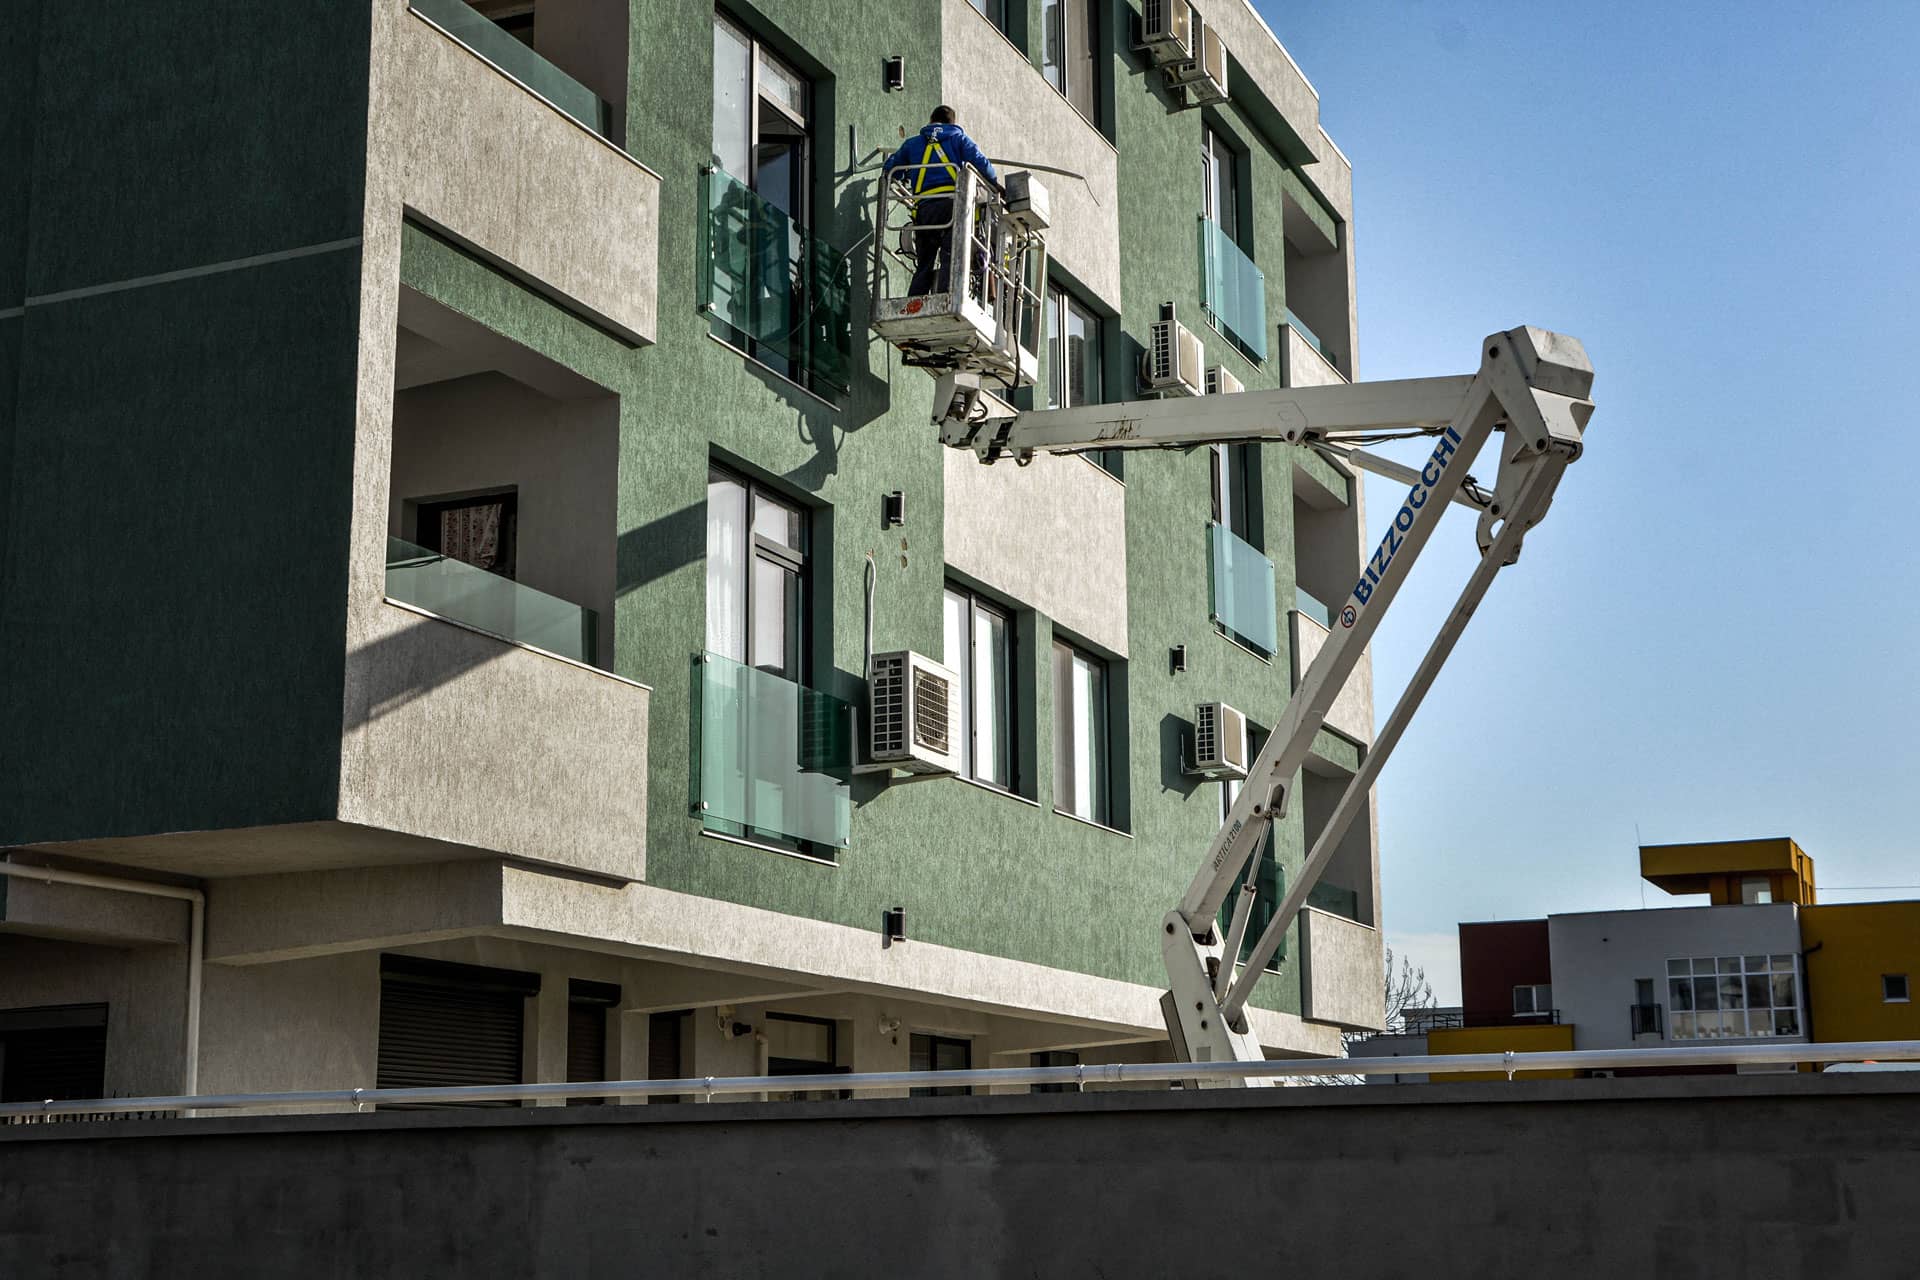 Worker working on a building from a height on a platform